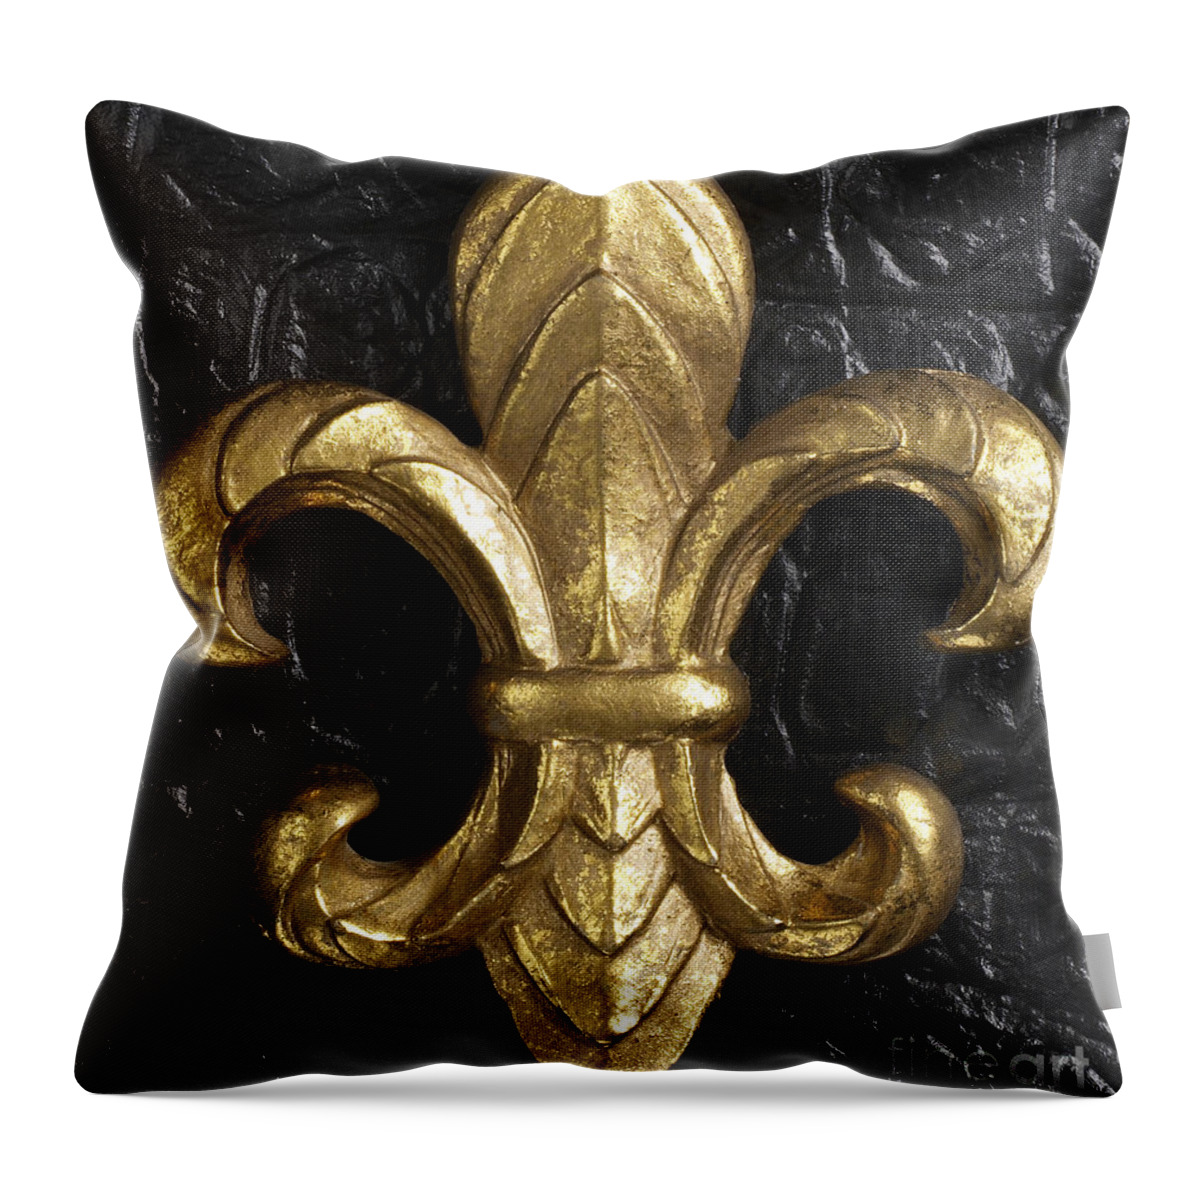 Gold Throw Pillow featuring the photograph Gold Fleur-di-lis by Tony Cordoza